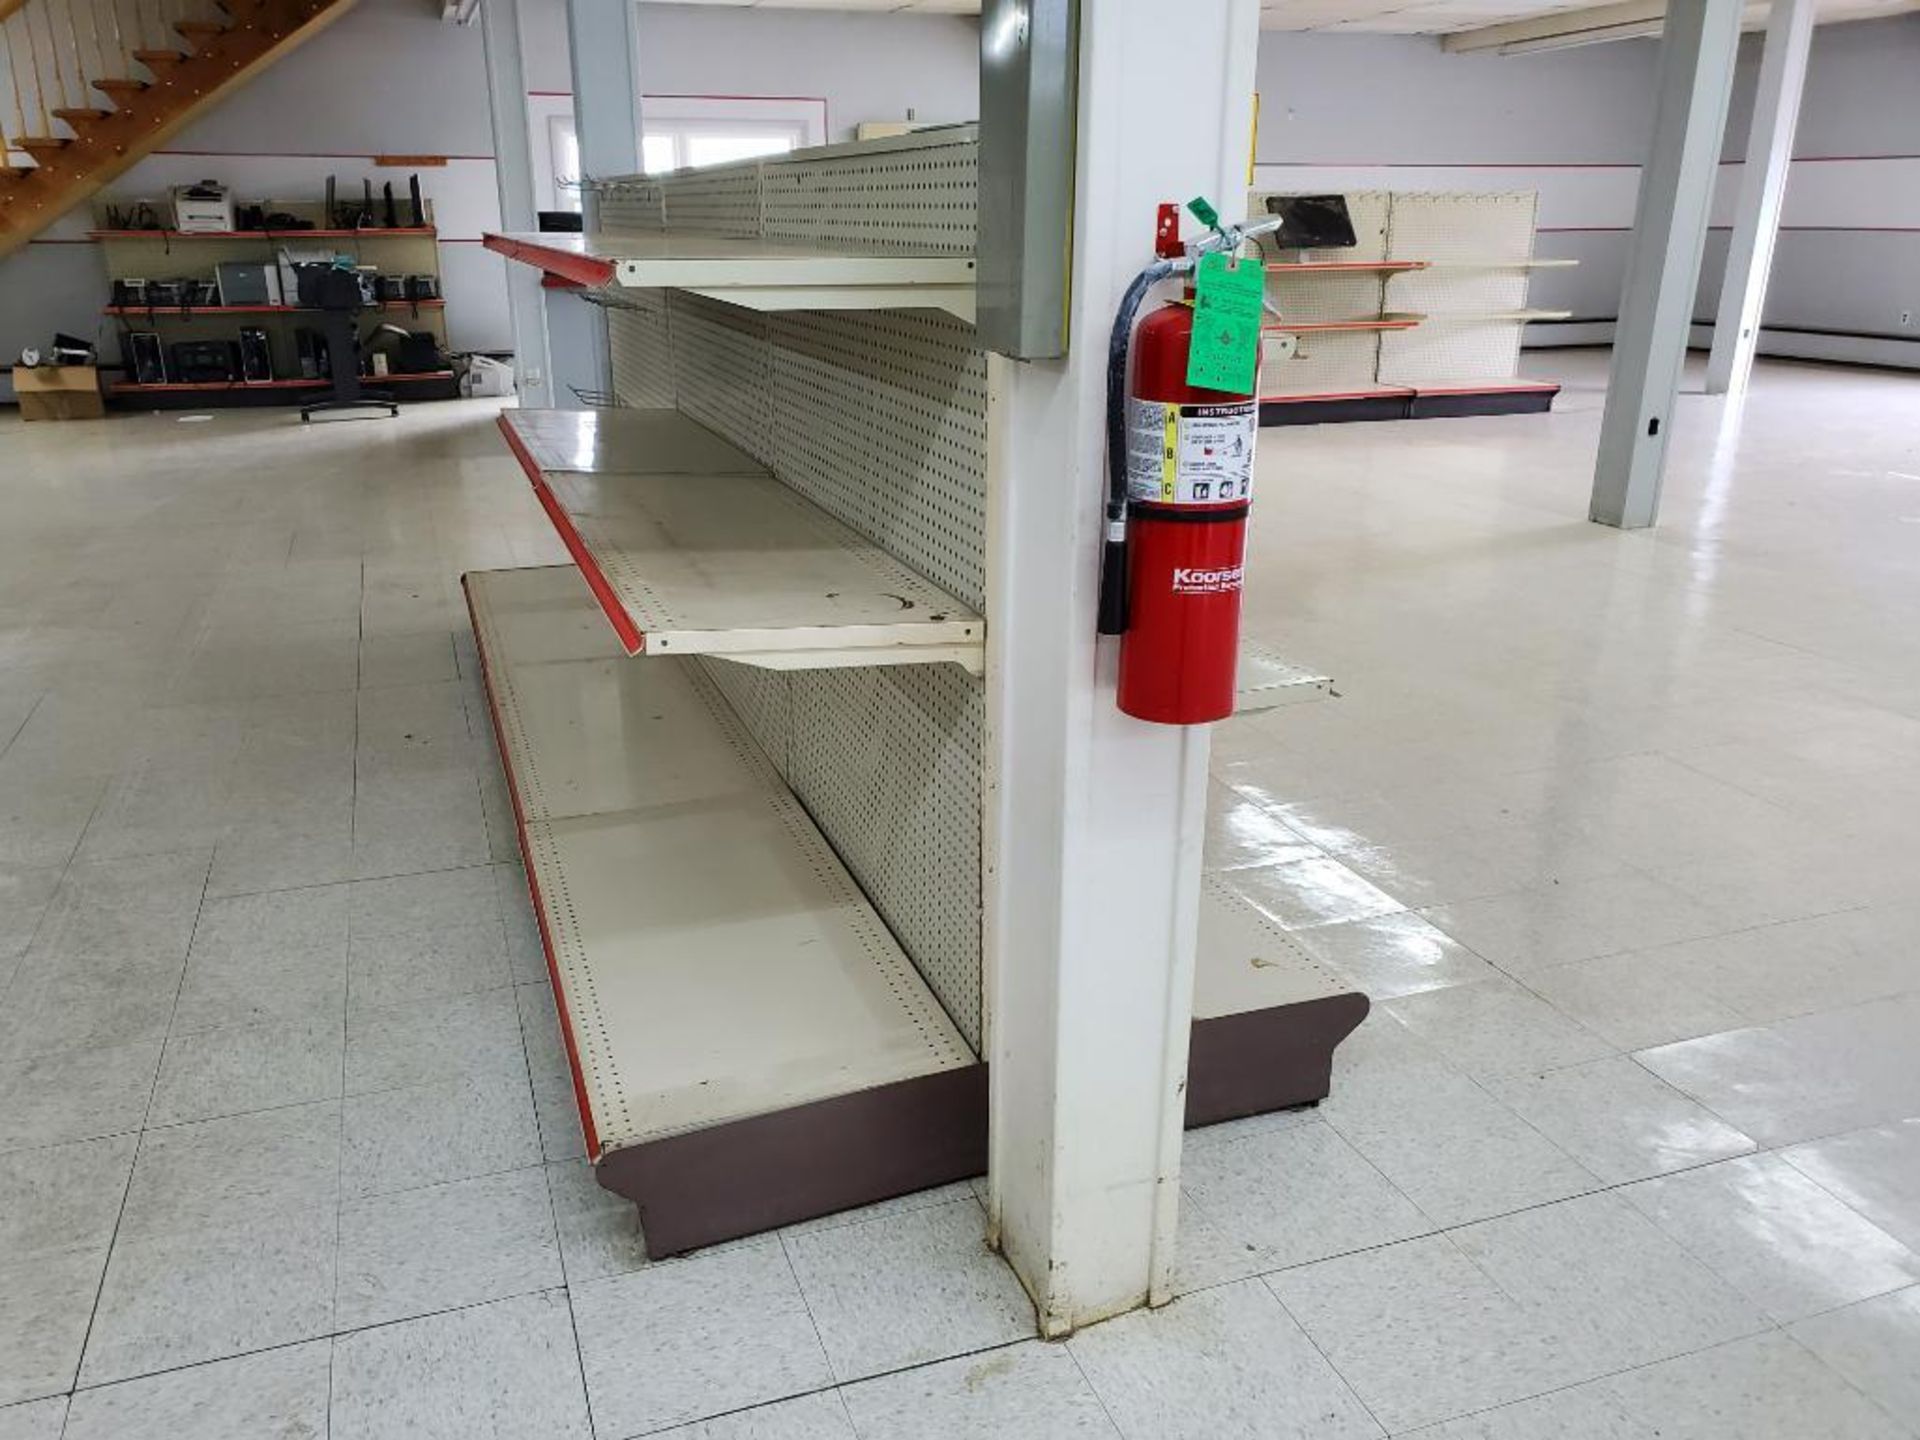 Retail shelving. Contents not included. Delayed removal until contents have been removed. - Image 2 of 6